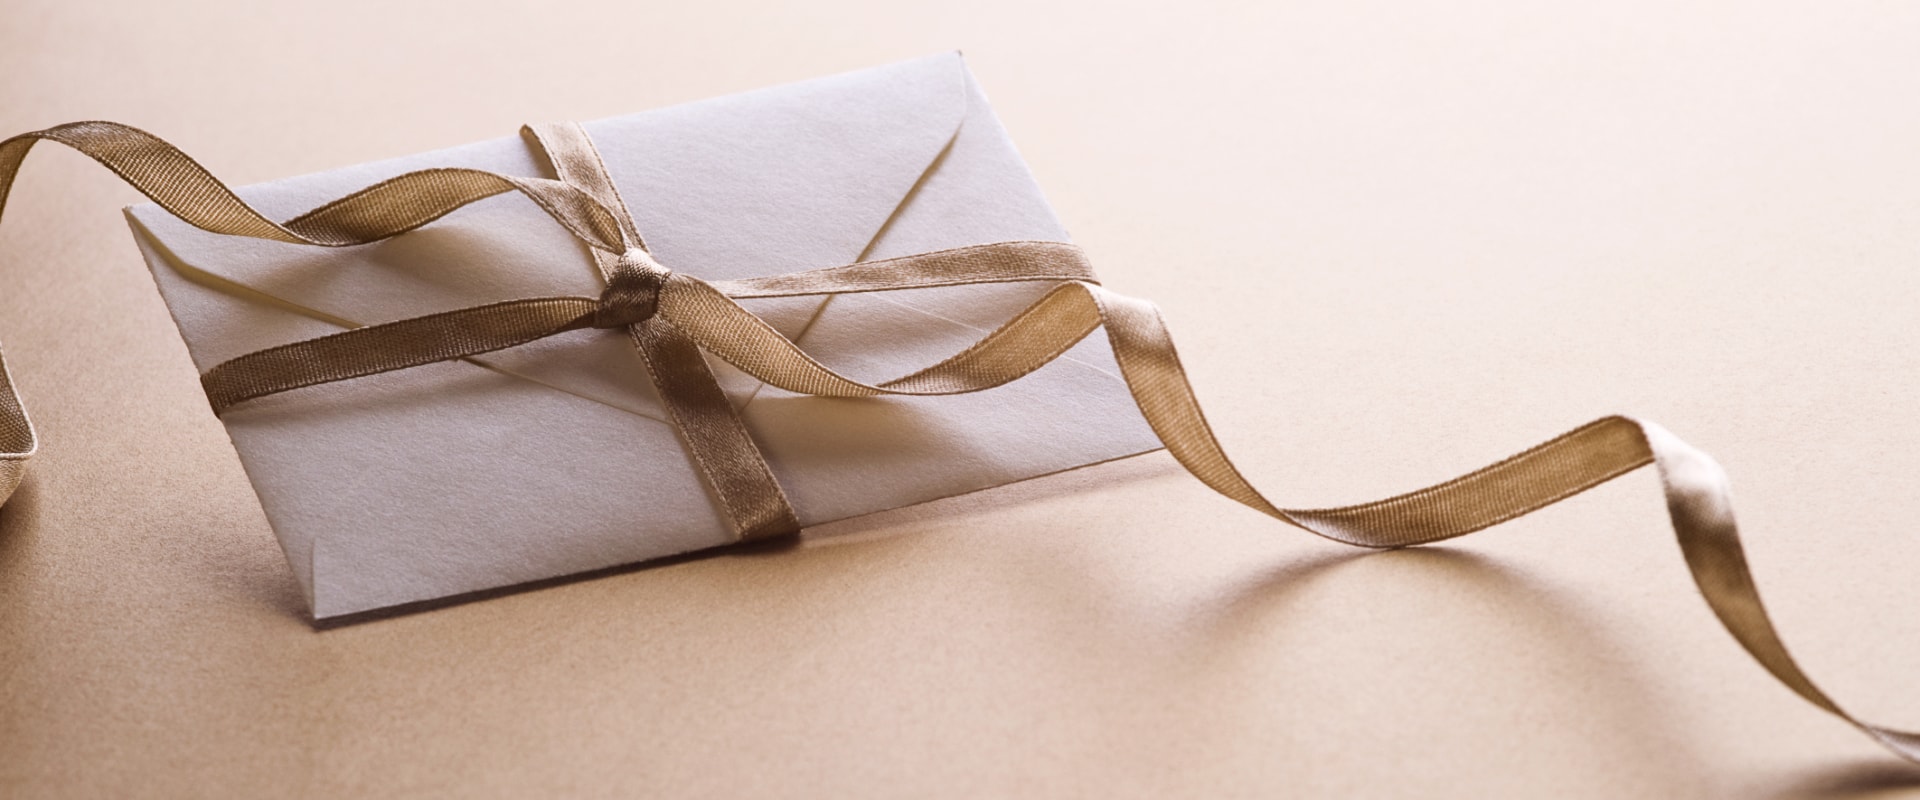 How much can you gift without reporting to irs?